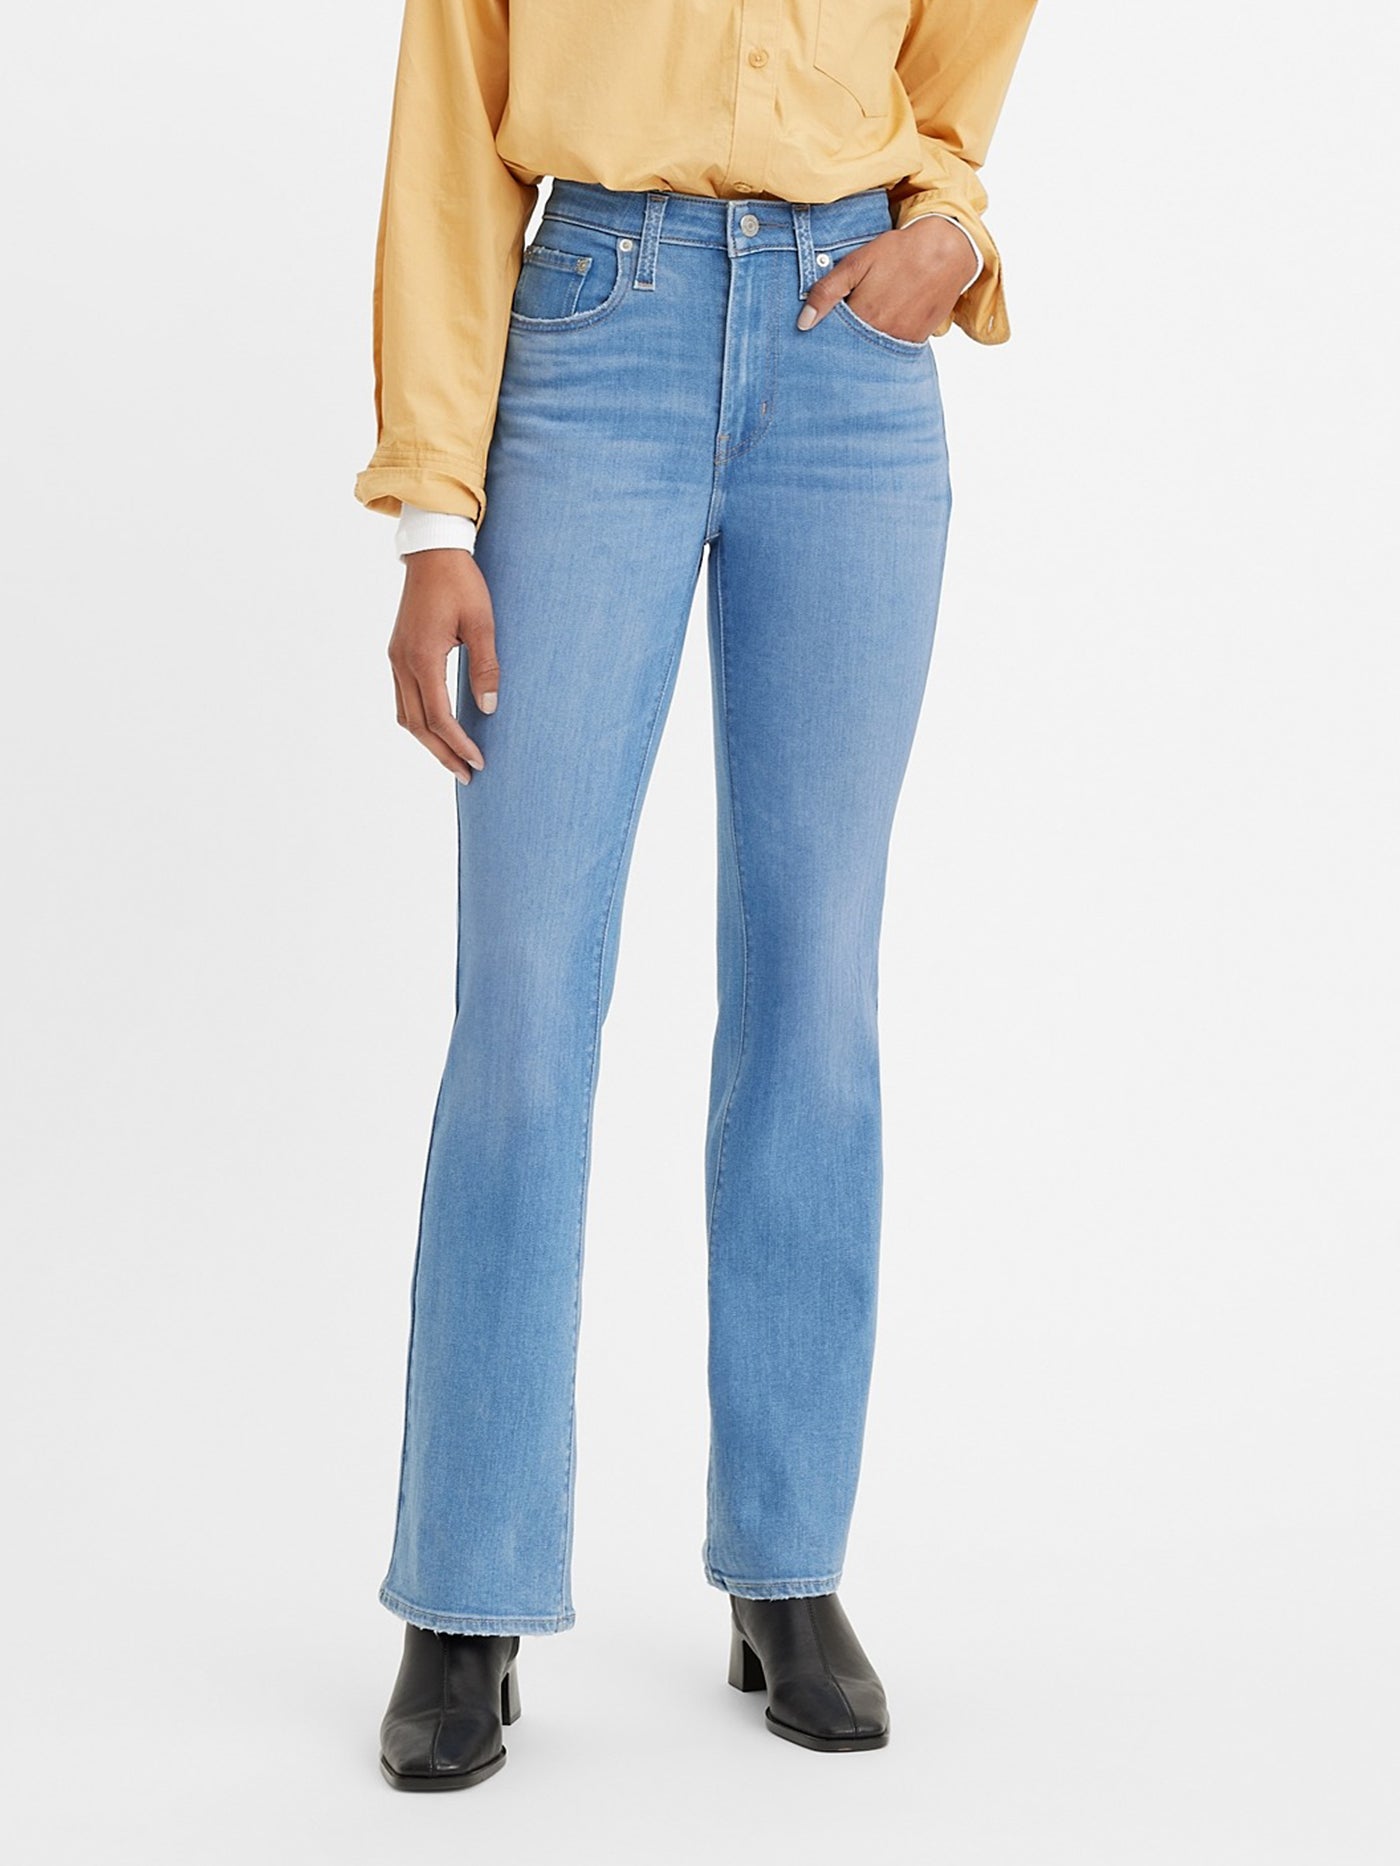 Levis 725 High Rise Bootcut Jean, Tore it Up - Jeans